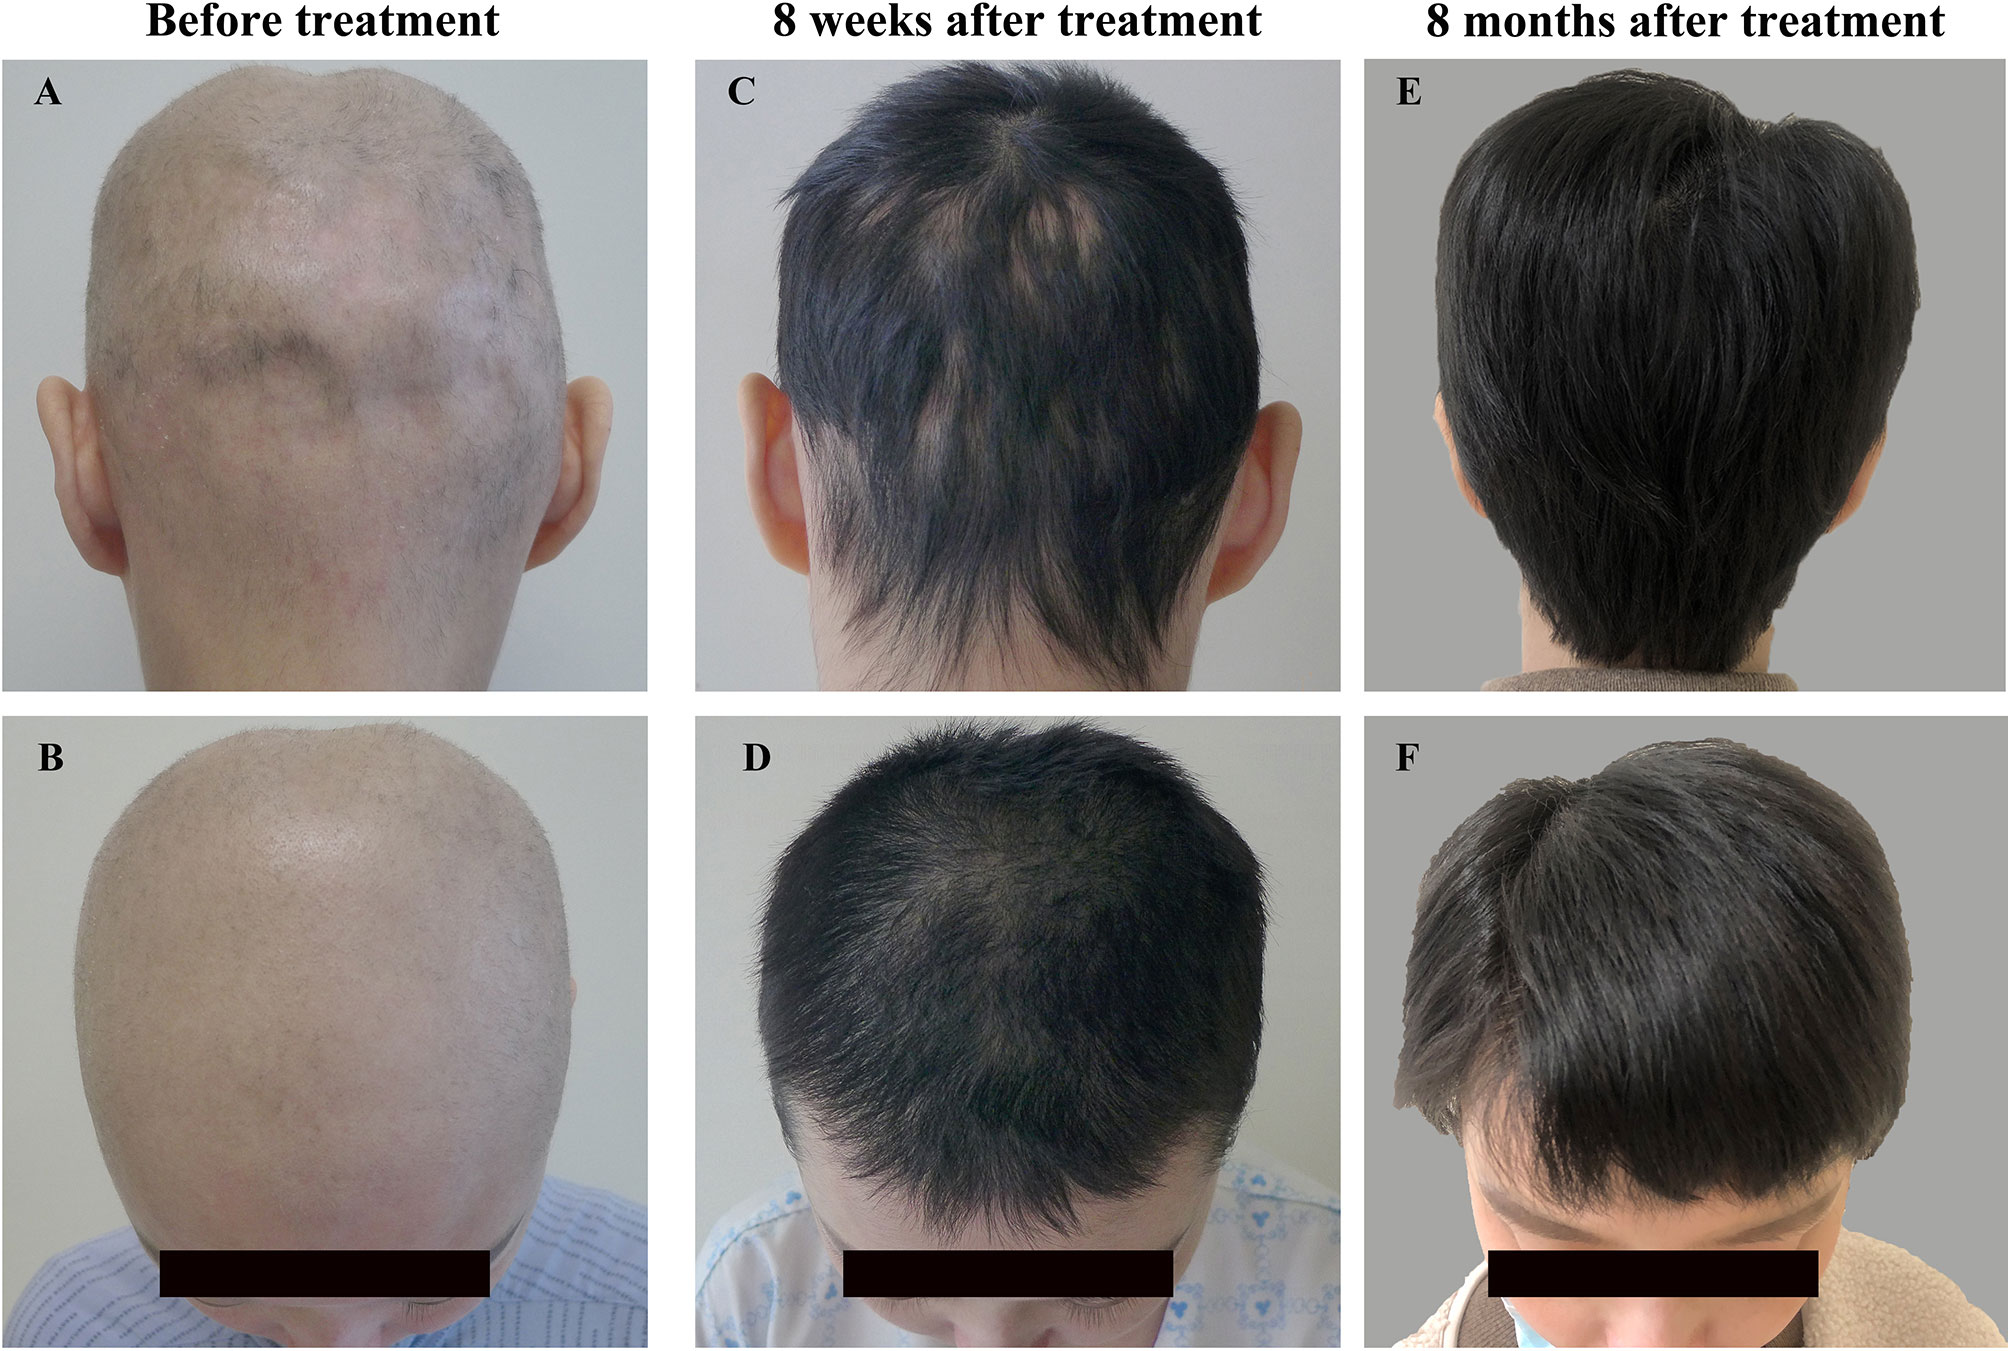 Frontiers | Case Report: Reversal of Long-Standing Refractory Diffuse  Non-Scarring Alopecia Due to Systemic Lupus Erythematosus Following  Treatment With Tofacitinib